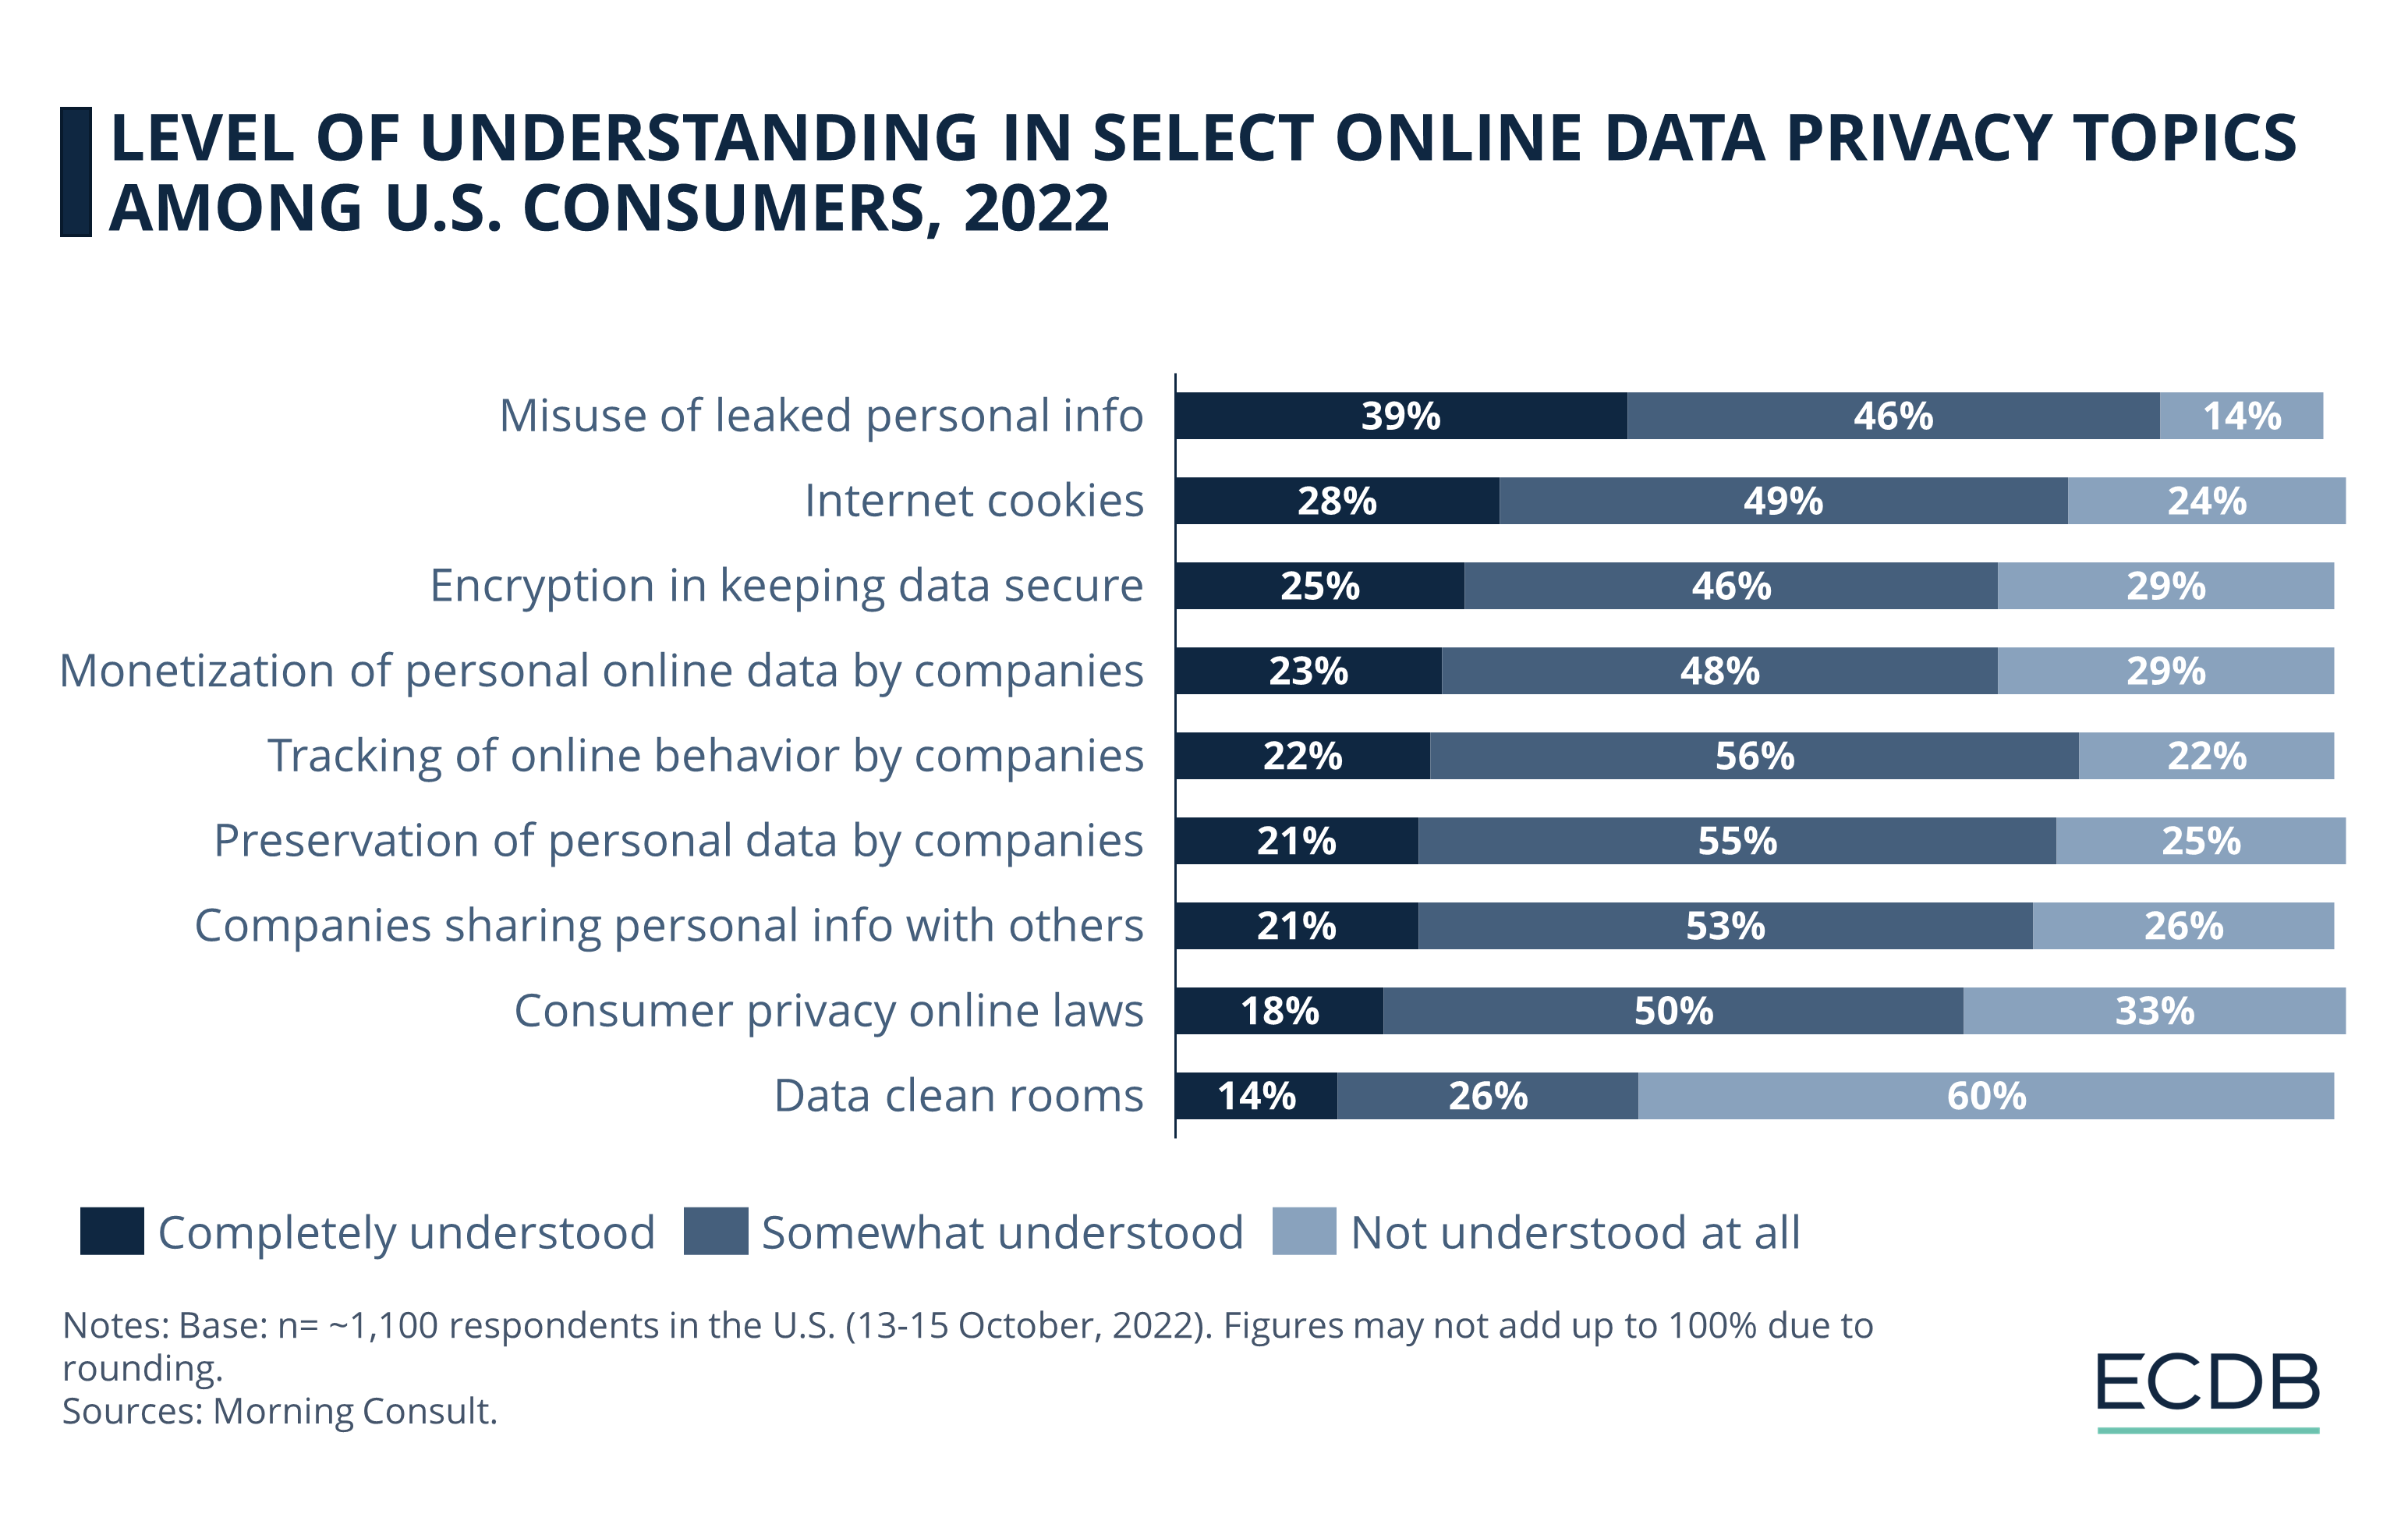 Level of Understanding in Select Online Data Privacy Topics Among U.S. Consumers, 2022